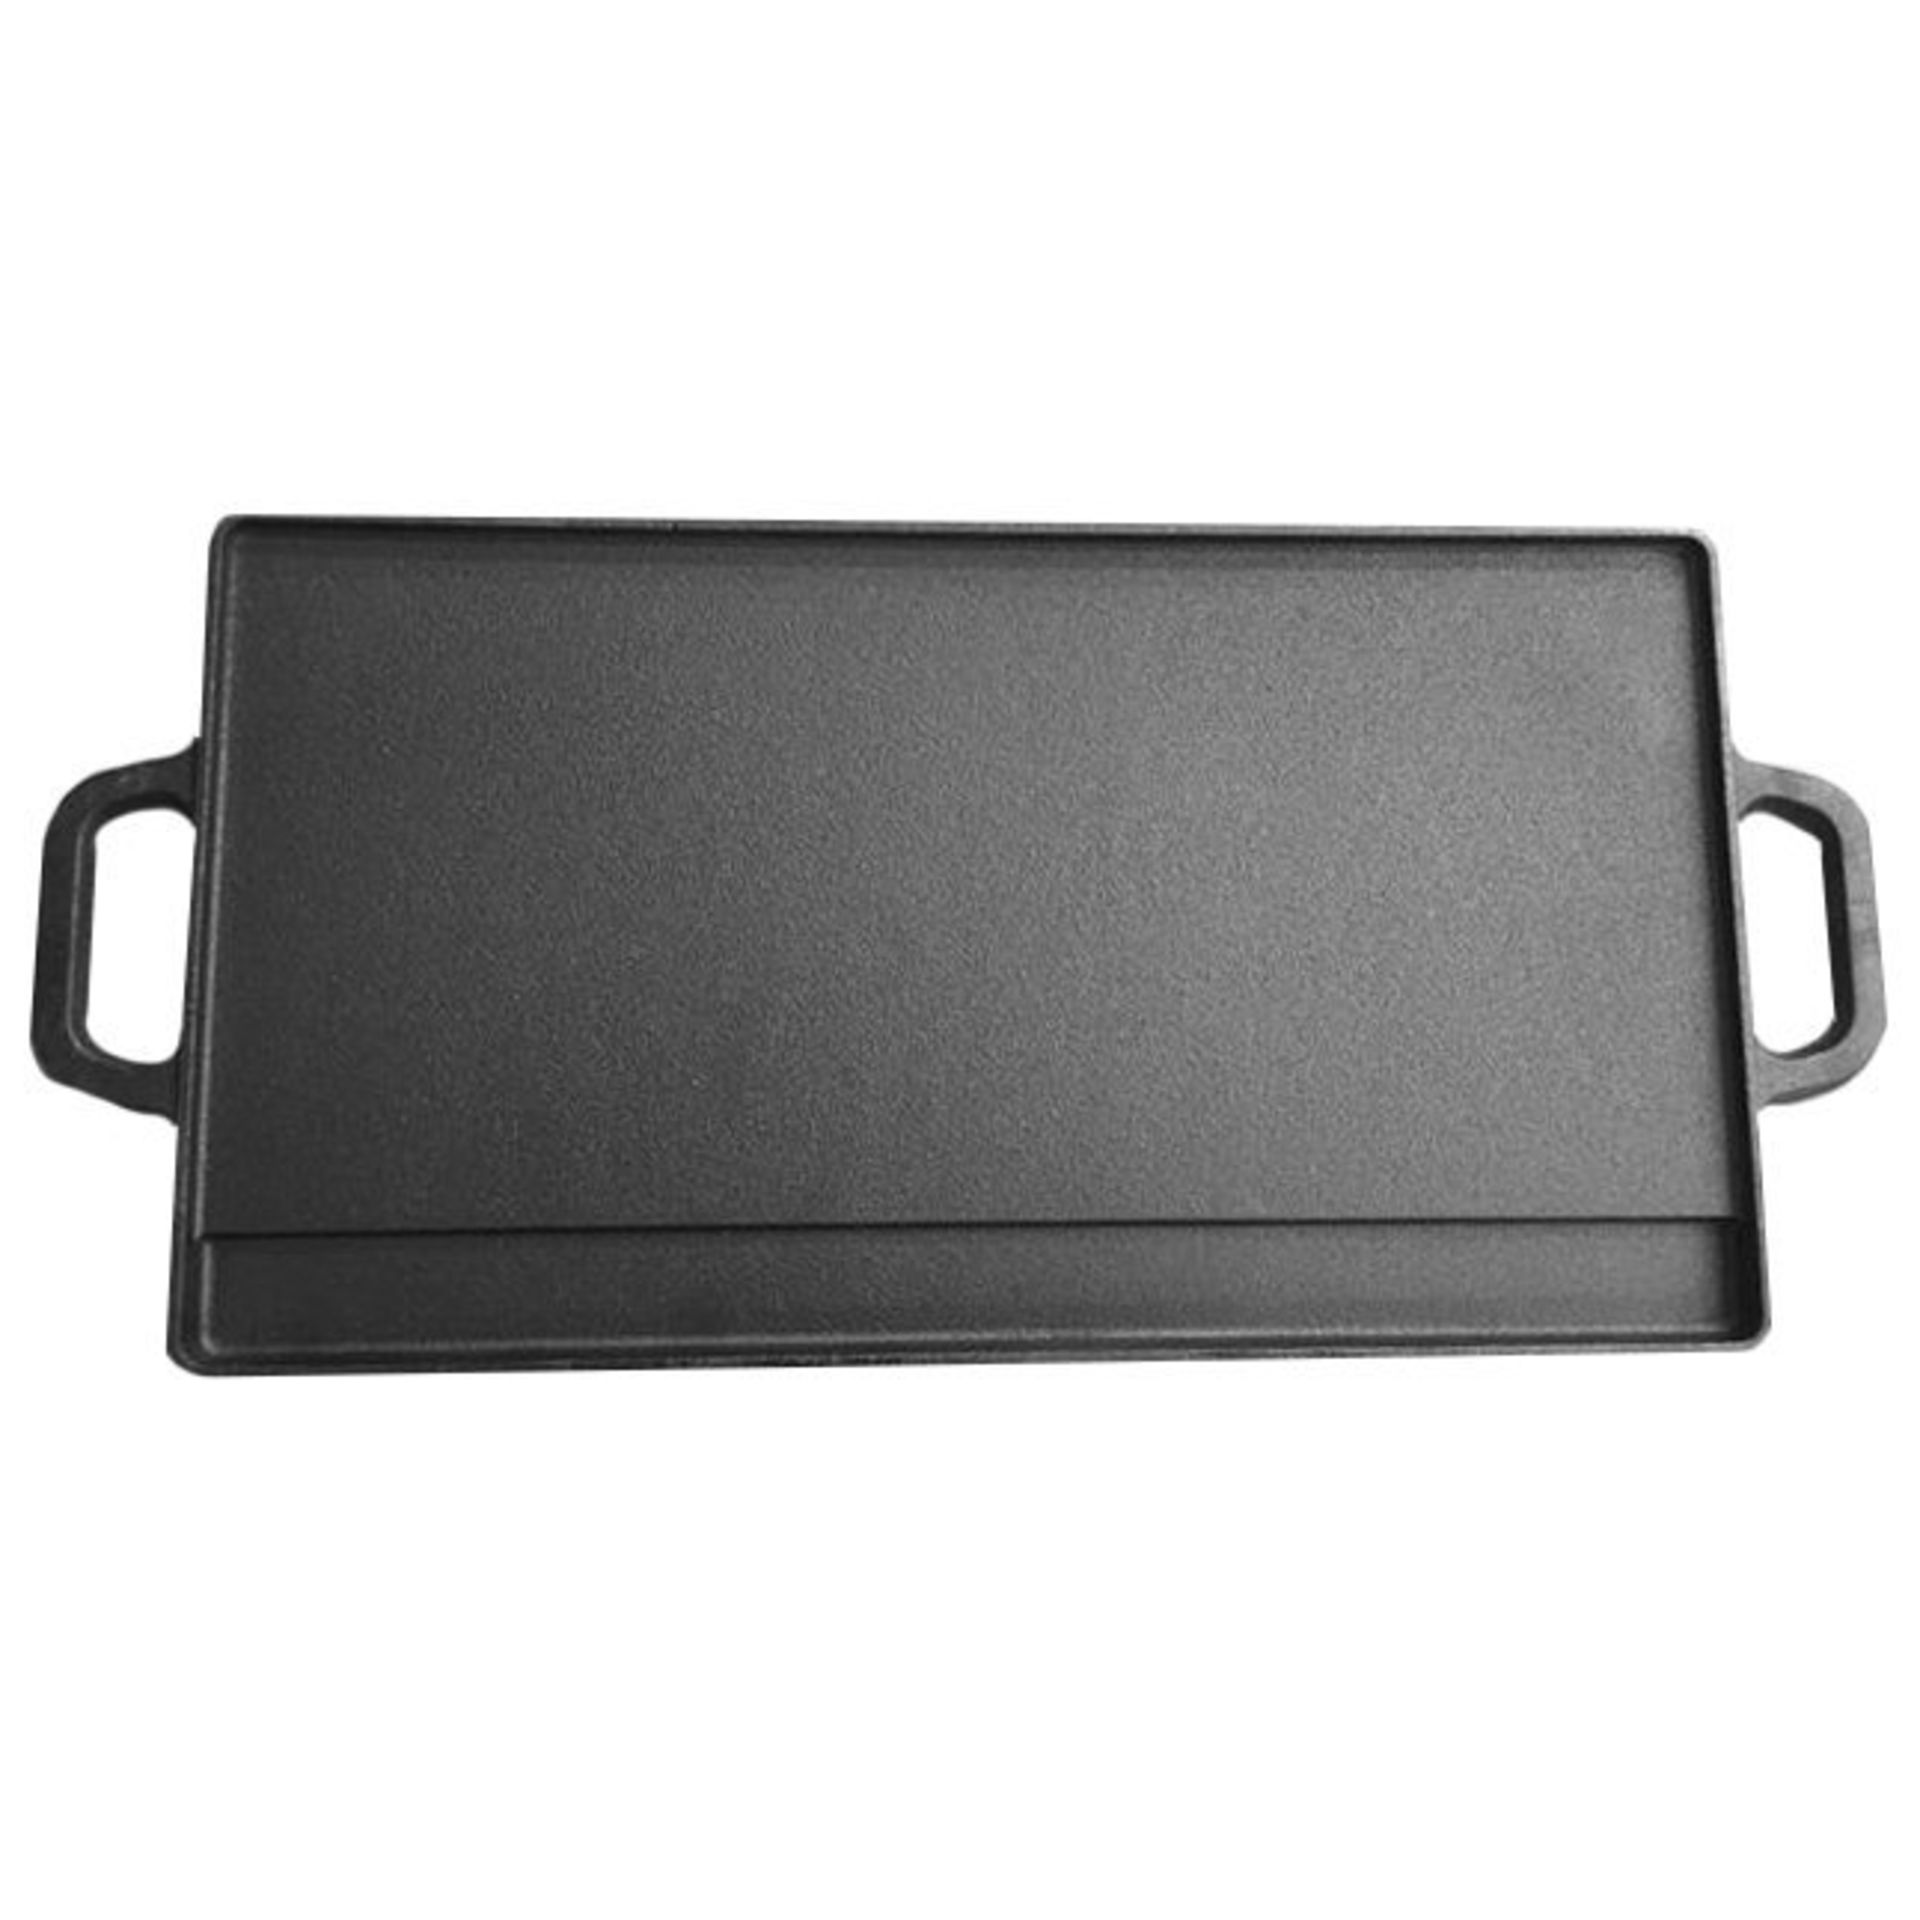 (LF128) Cast Iron Non Stick Reversible Griddle Pan BBQ Grill Plate Dimensions: 42.5 x 23cm Hi... - Image 2 of 2